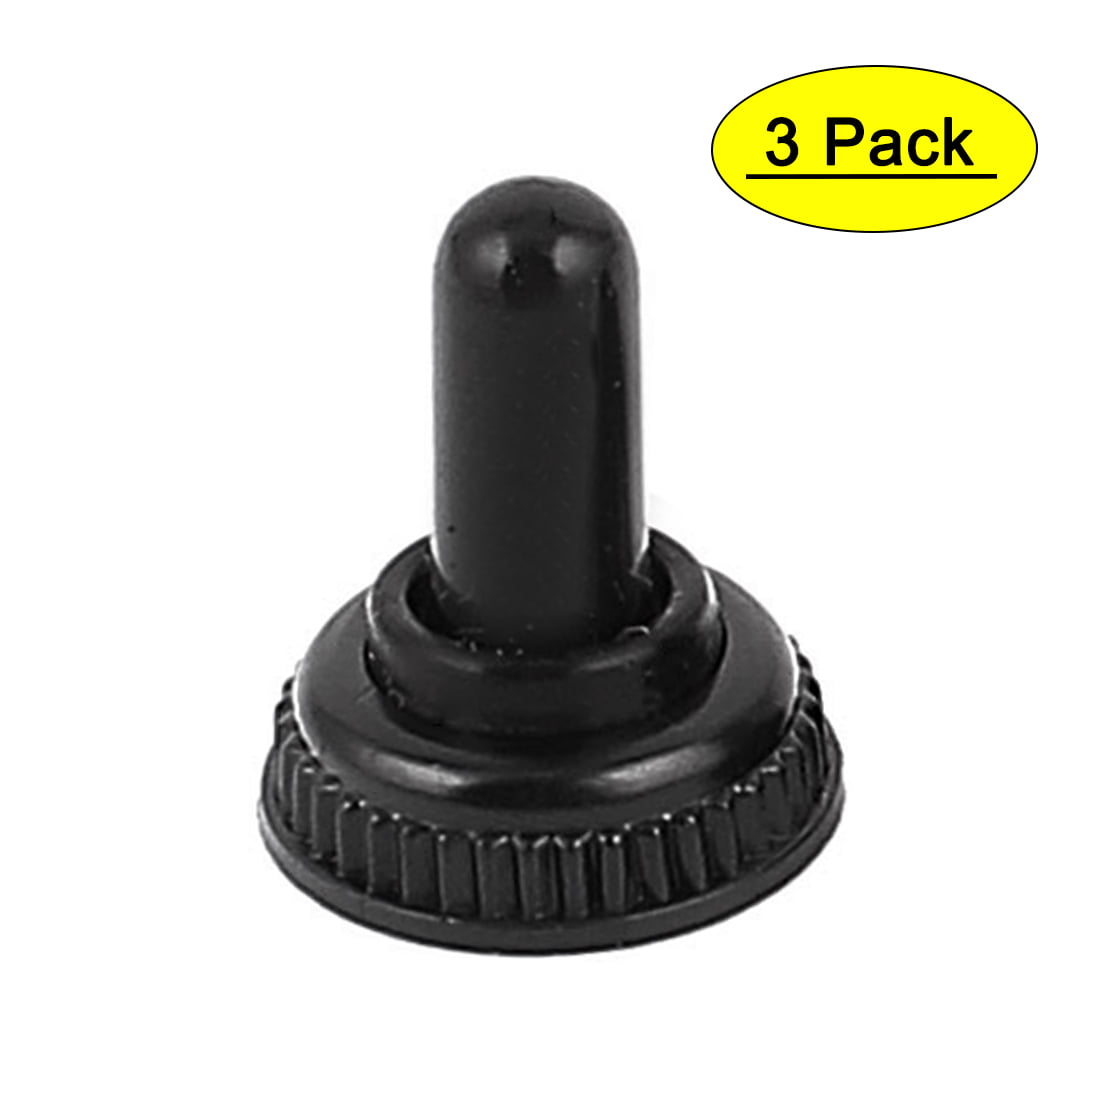 20 pcs 12mm WaterProof Rubber Resistance Boot Cover Cap For Toggle Switch 